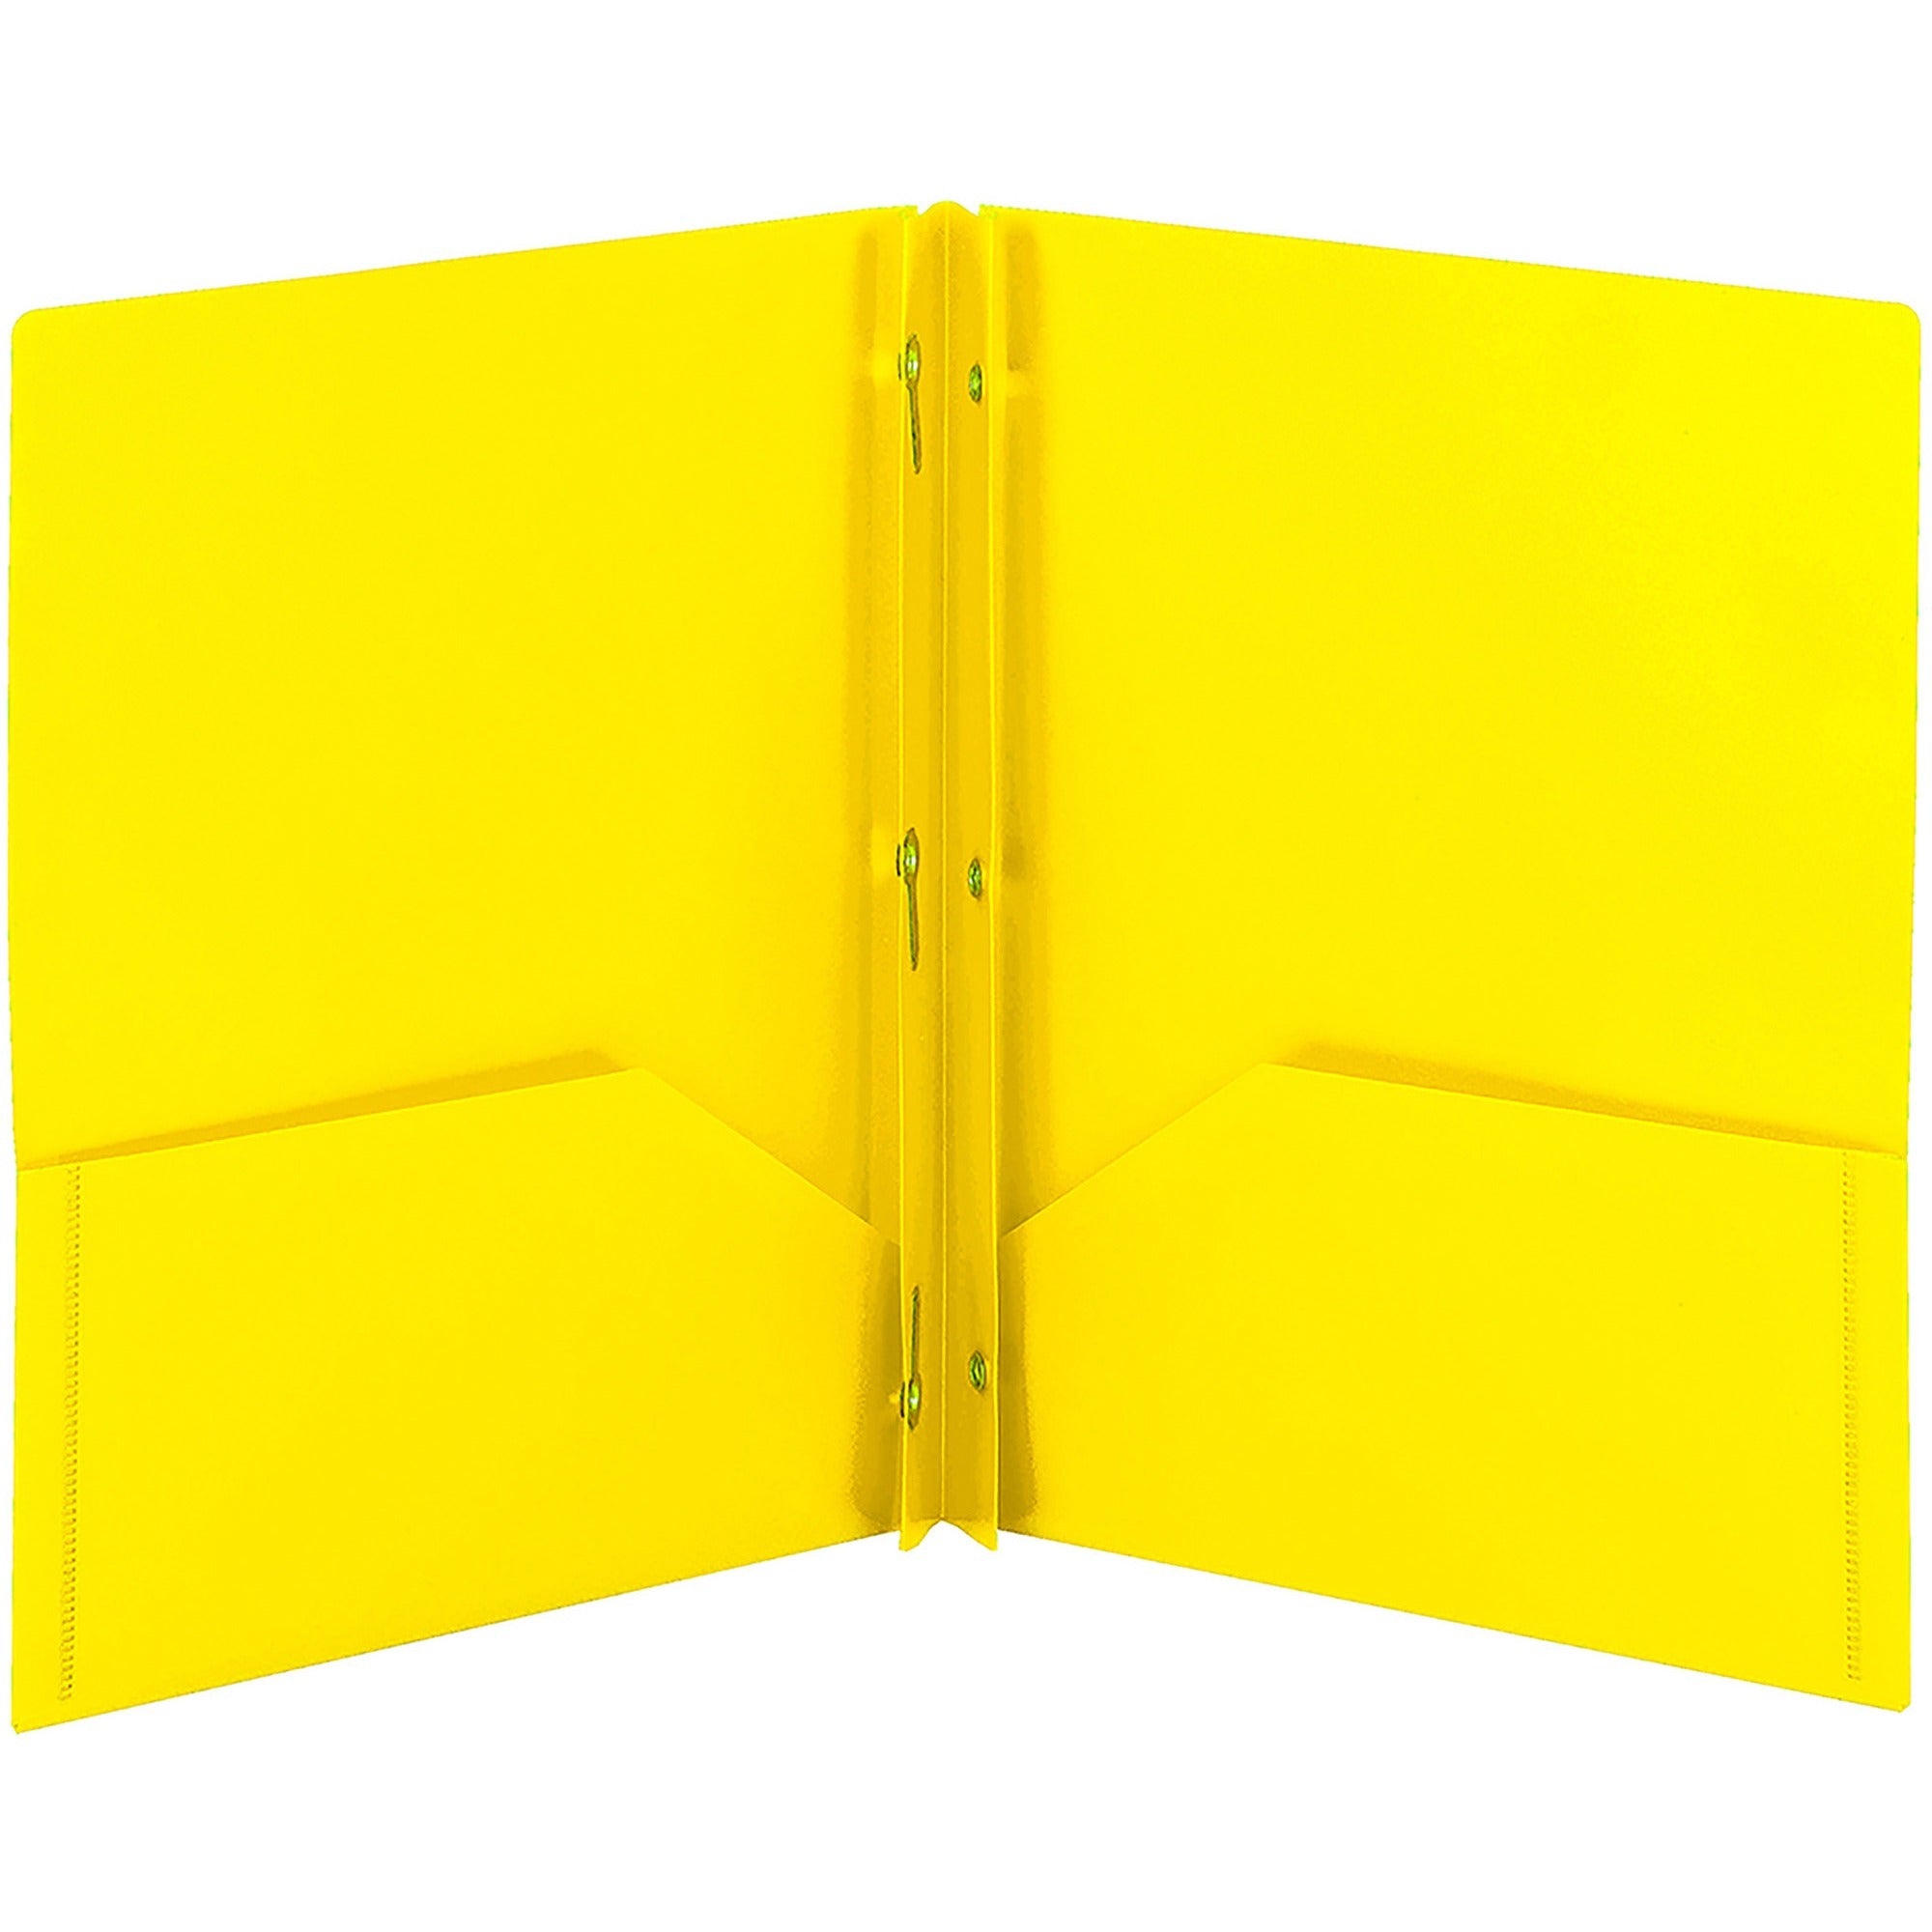 smead-letter-fastener-folder-8-1-2-x-11-180-sheet-capacity-2-x-double-tang-fasteners-2-inside-back-pockets-yellow-72-carton_smd87733 - 1